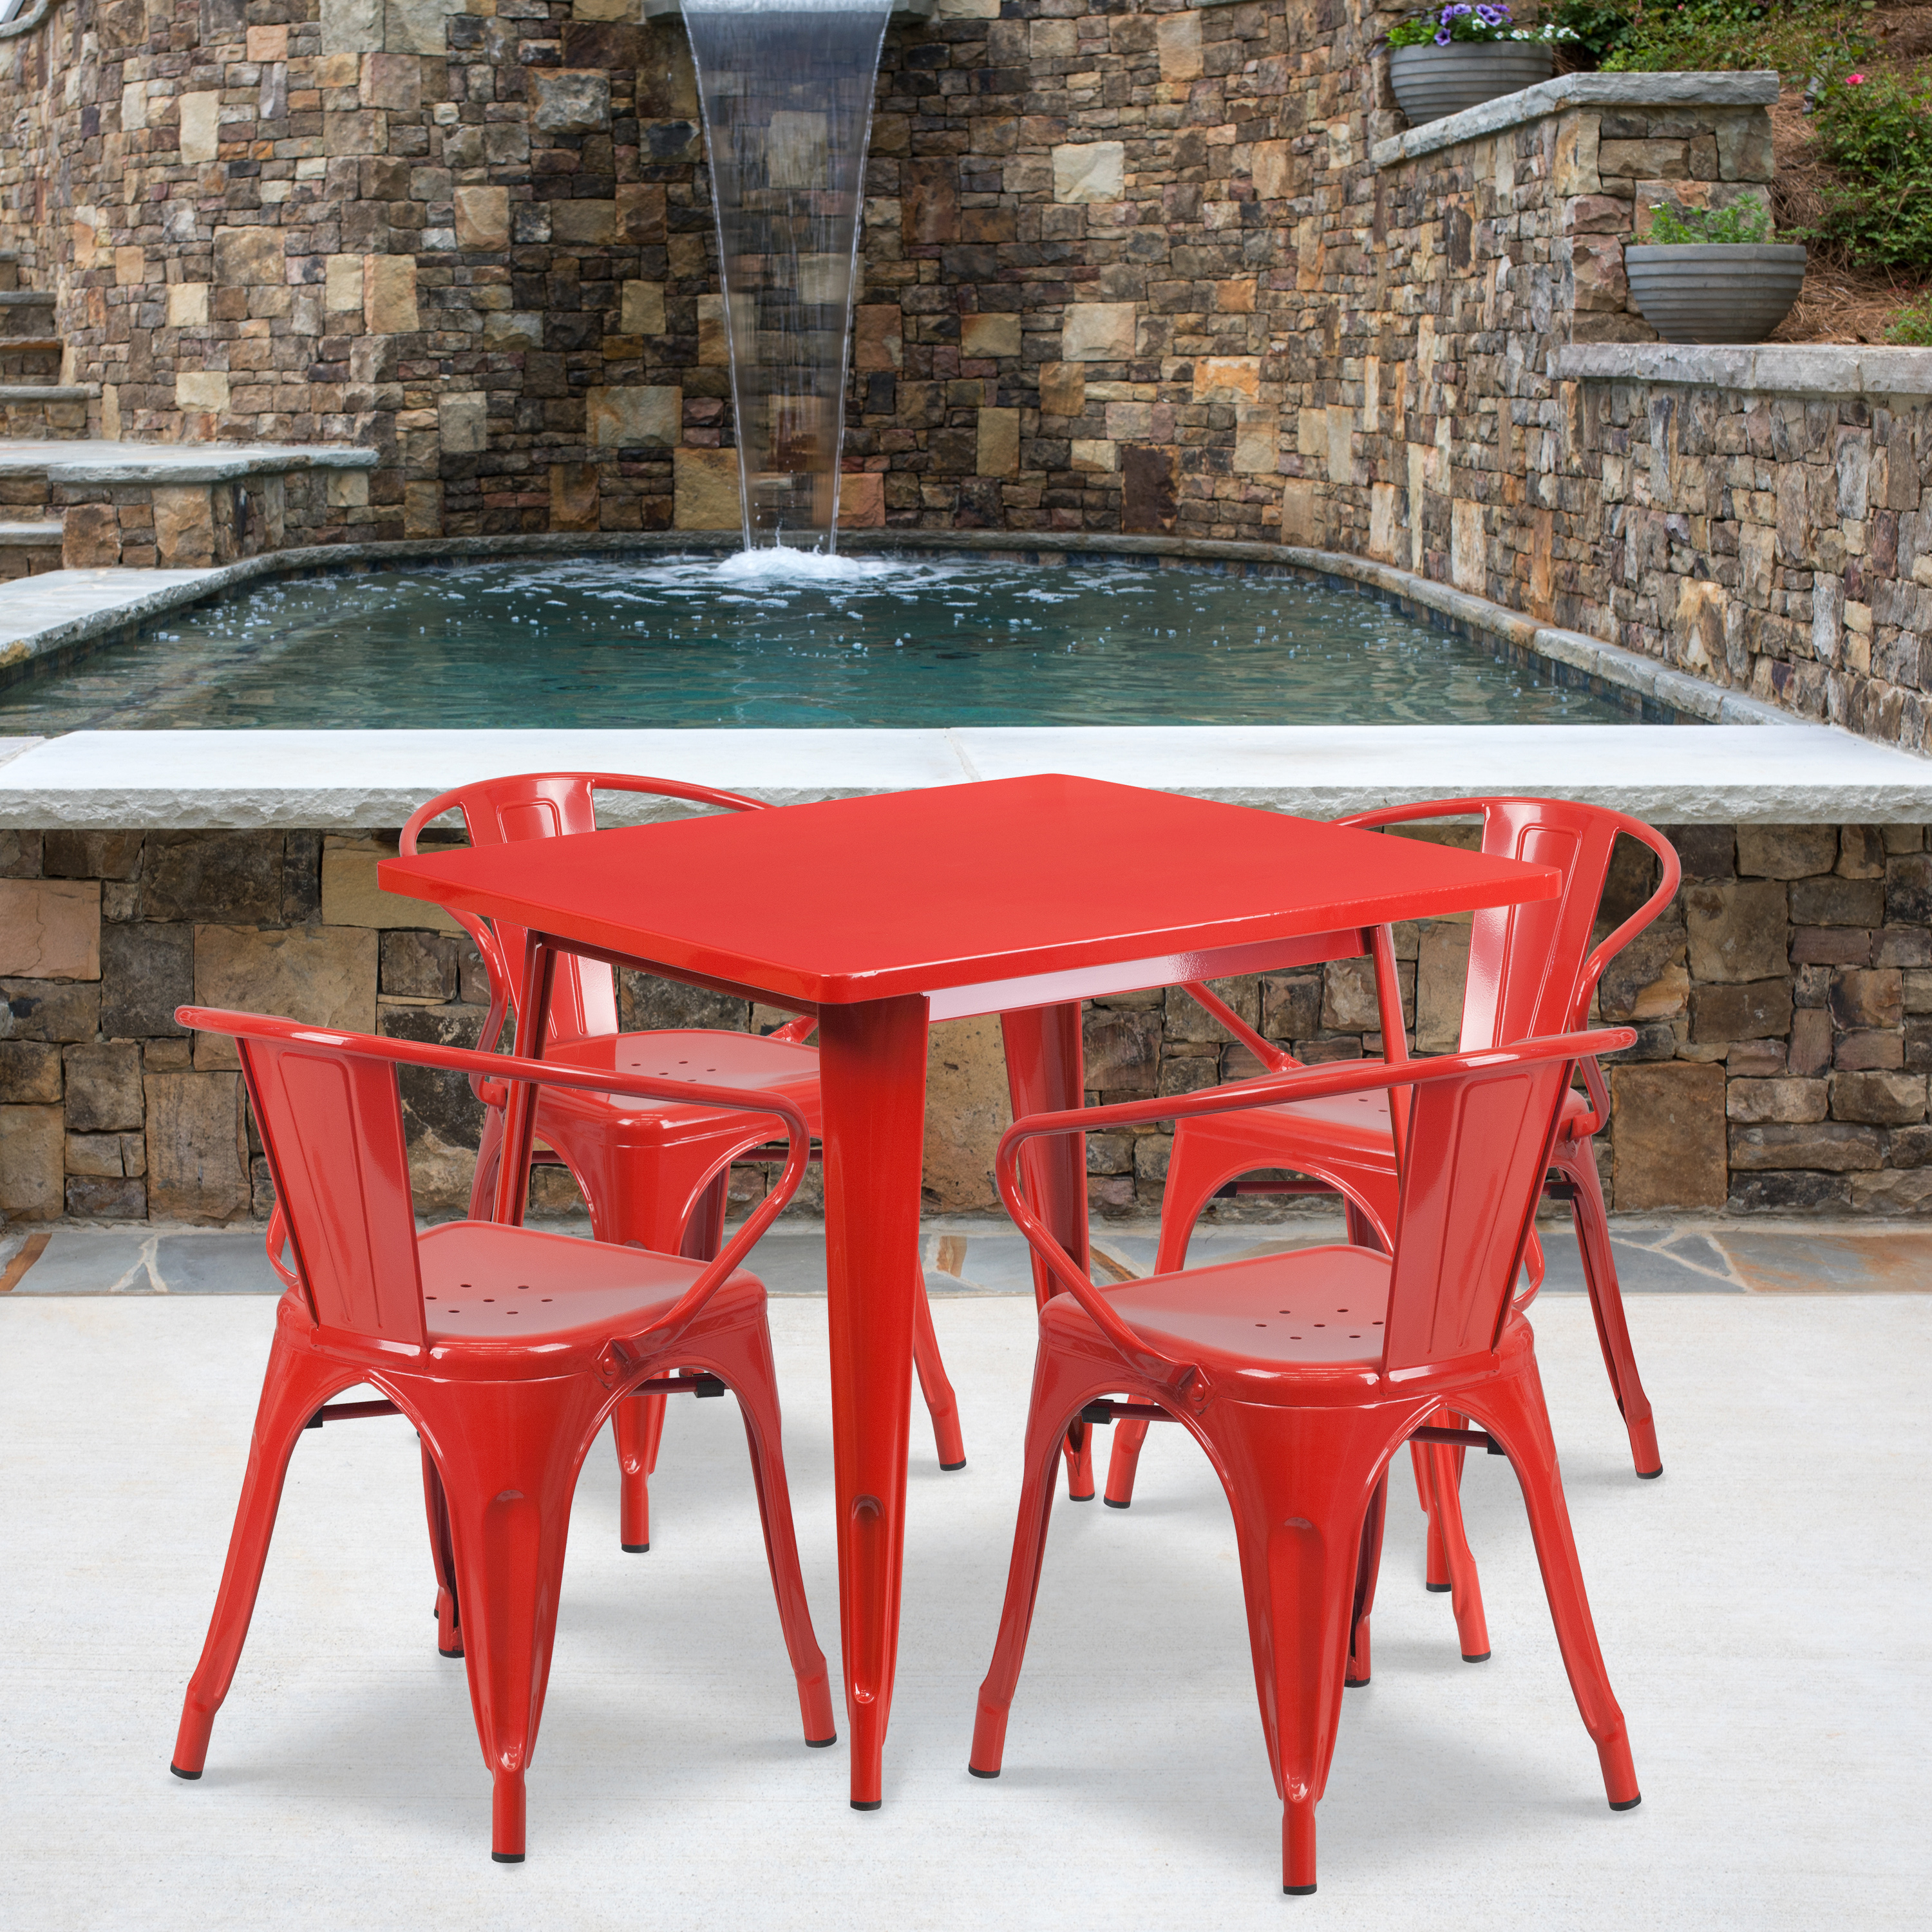 Flash Furniture Grady Commercial Grade 31.5" Square Red Metal Indoor-Outdoor Table Set with 4 Arm Chairs - image 1 of 5